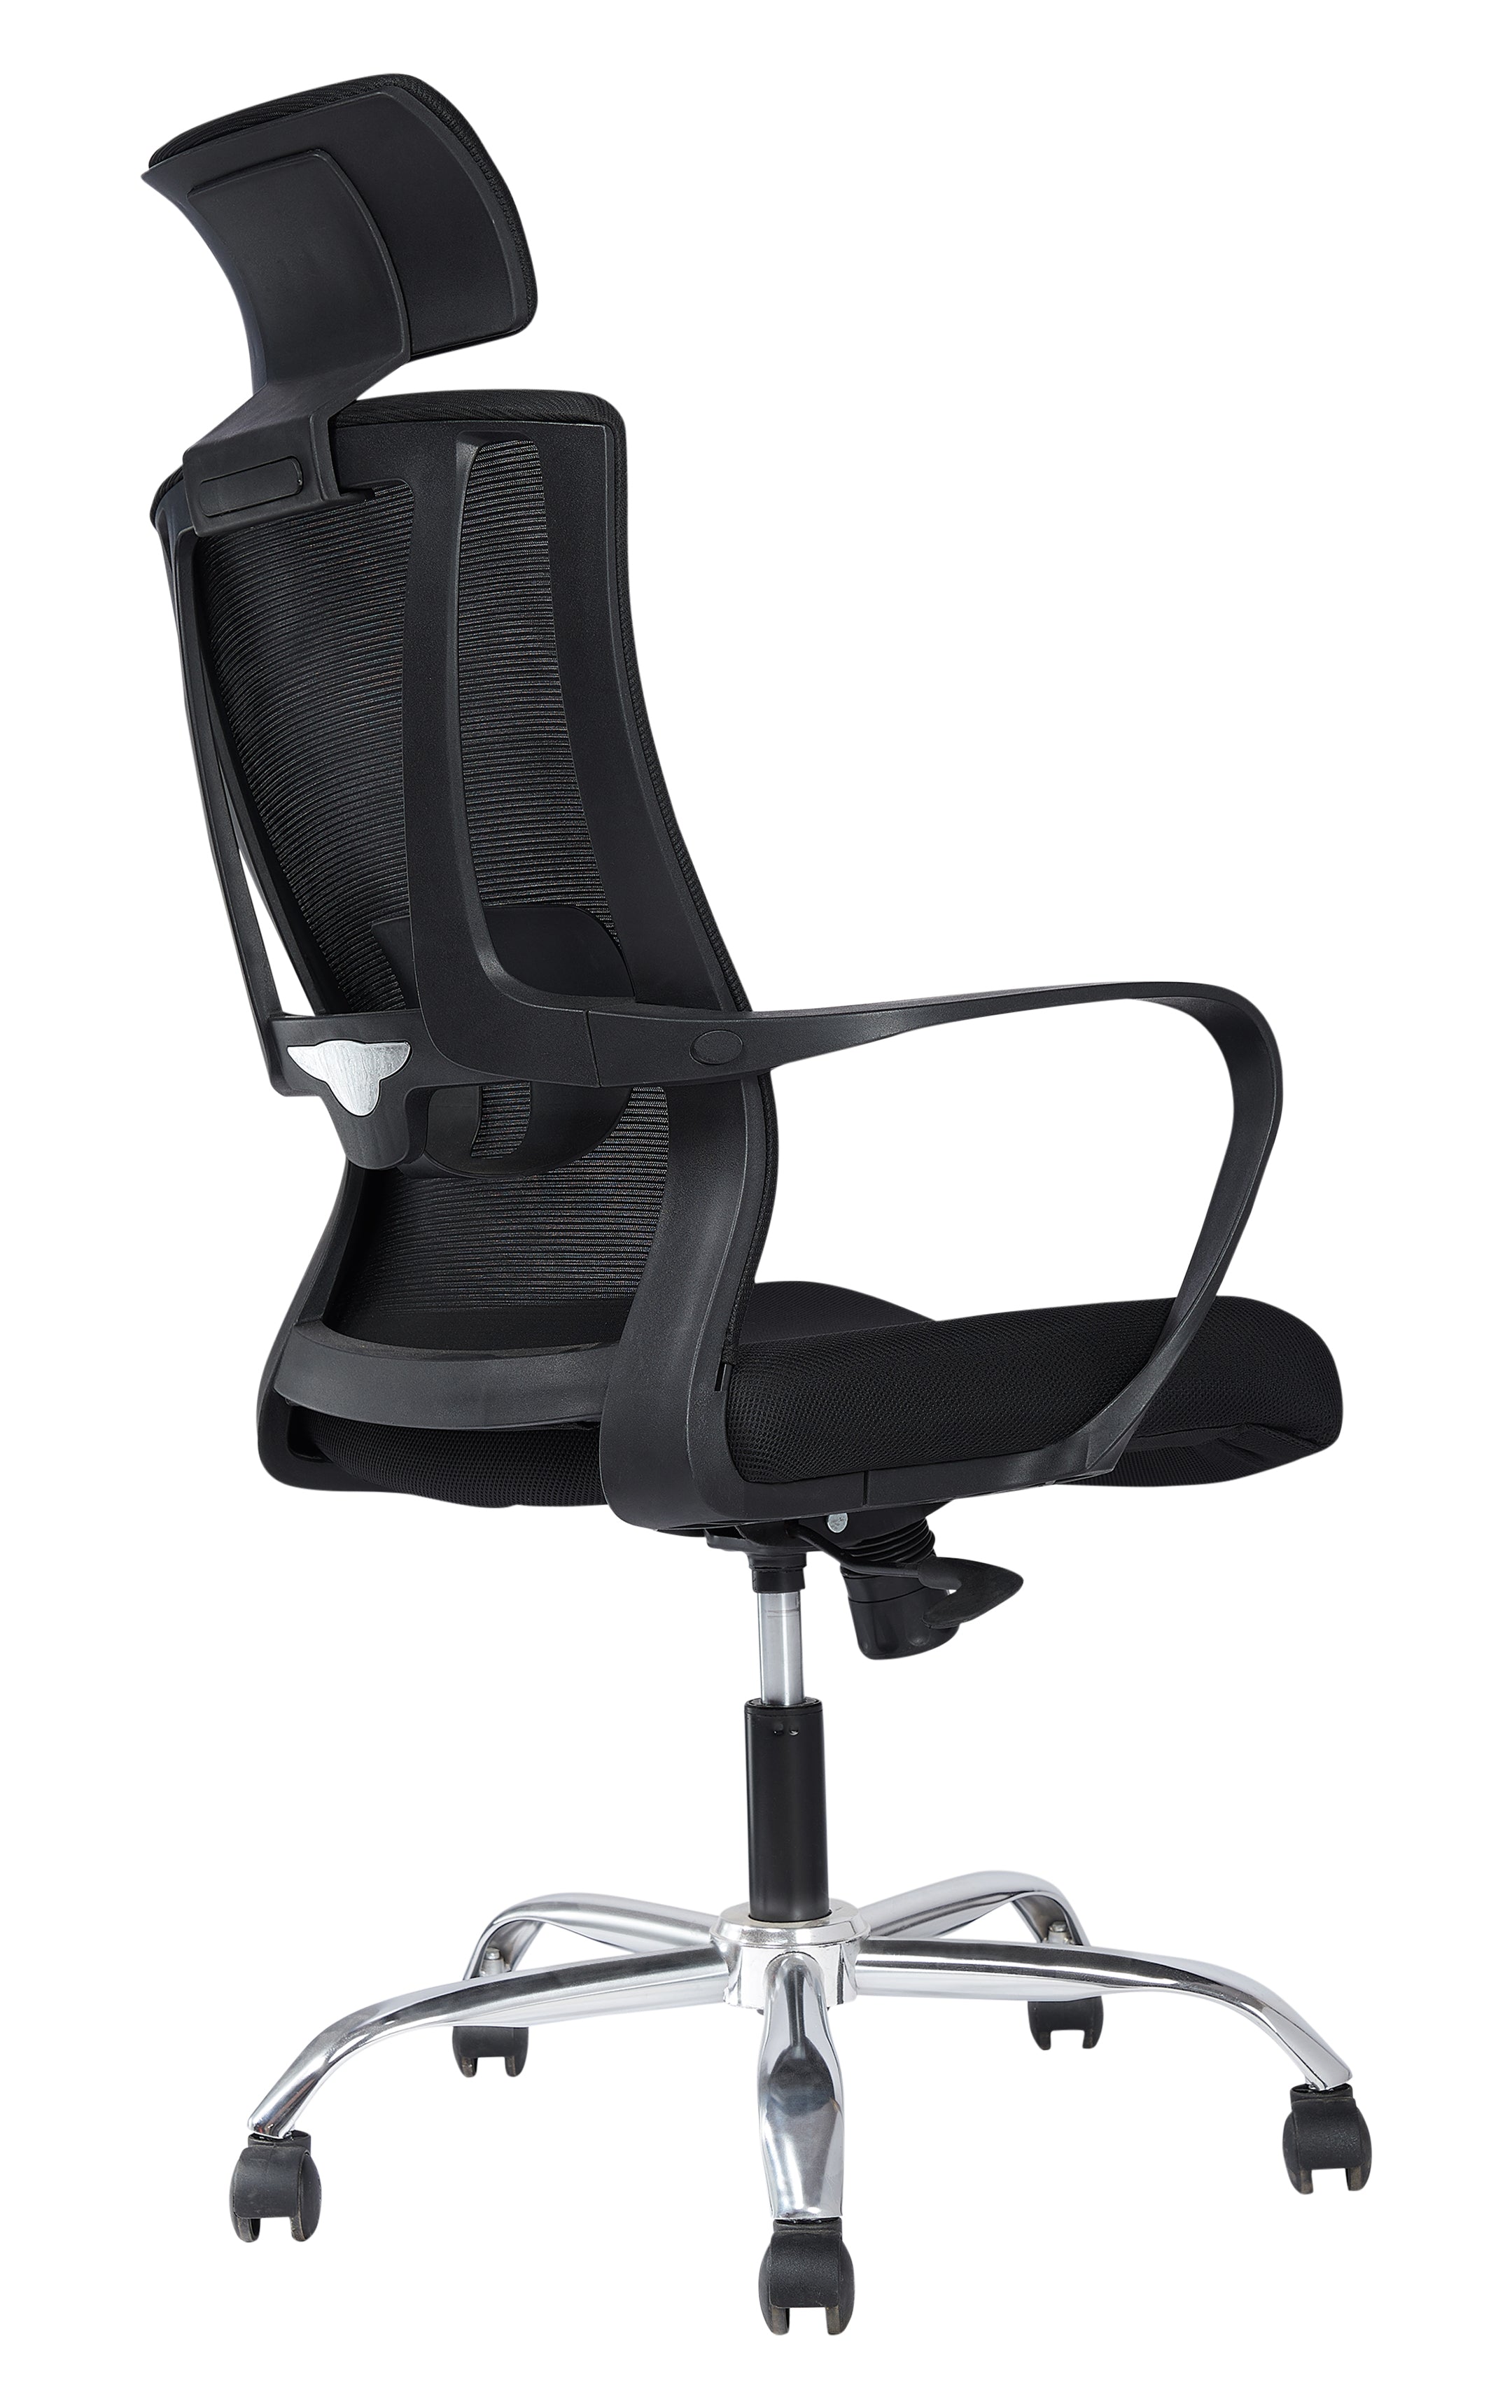 Eiger High back Office Work Station Chair with Cushion Seat And Chrome Base - Black